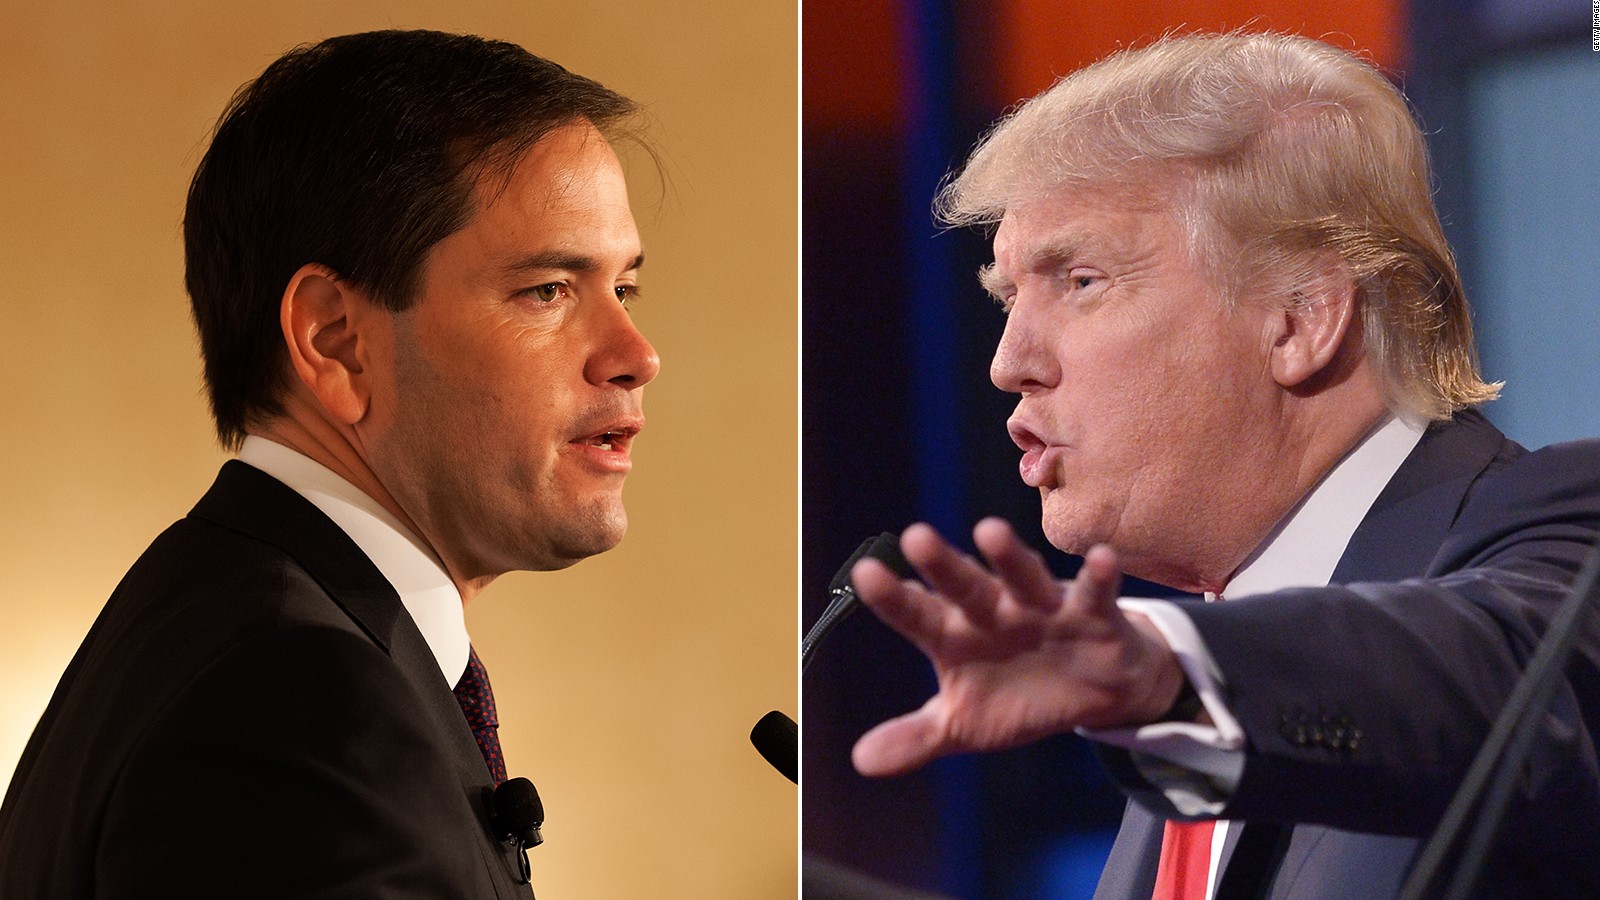 Rubio rebukes Trump: 'This election is not being rigged'